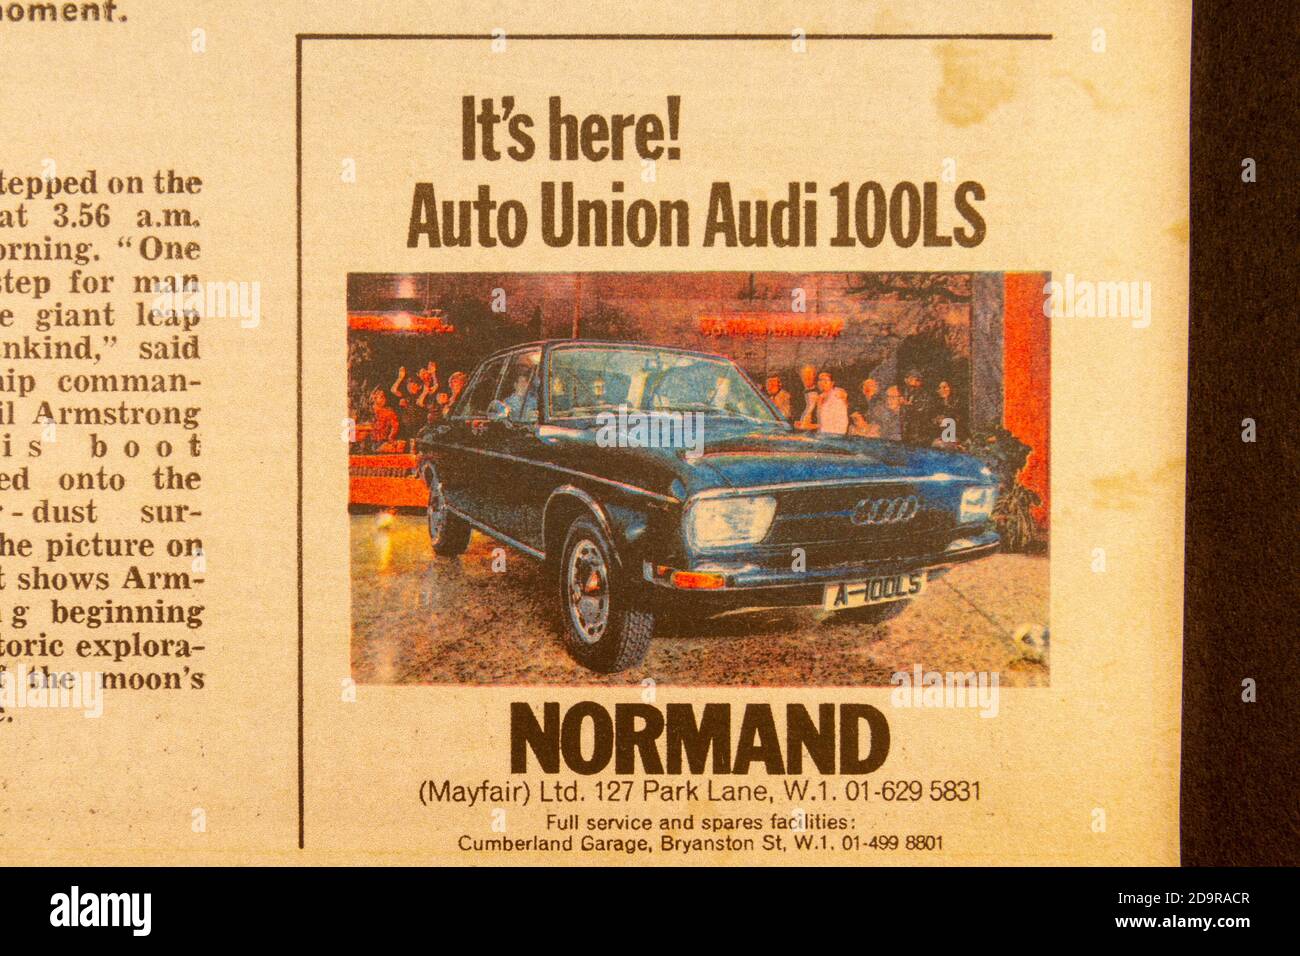 Advert for Auto Union Audi 100LS Normand car inside an Evening Standard souvenir newspaper (replica) for the Apollo 11 Moon landings on 21st July 1969 Stock Photo